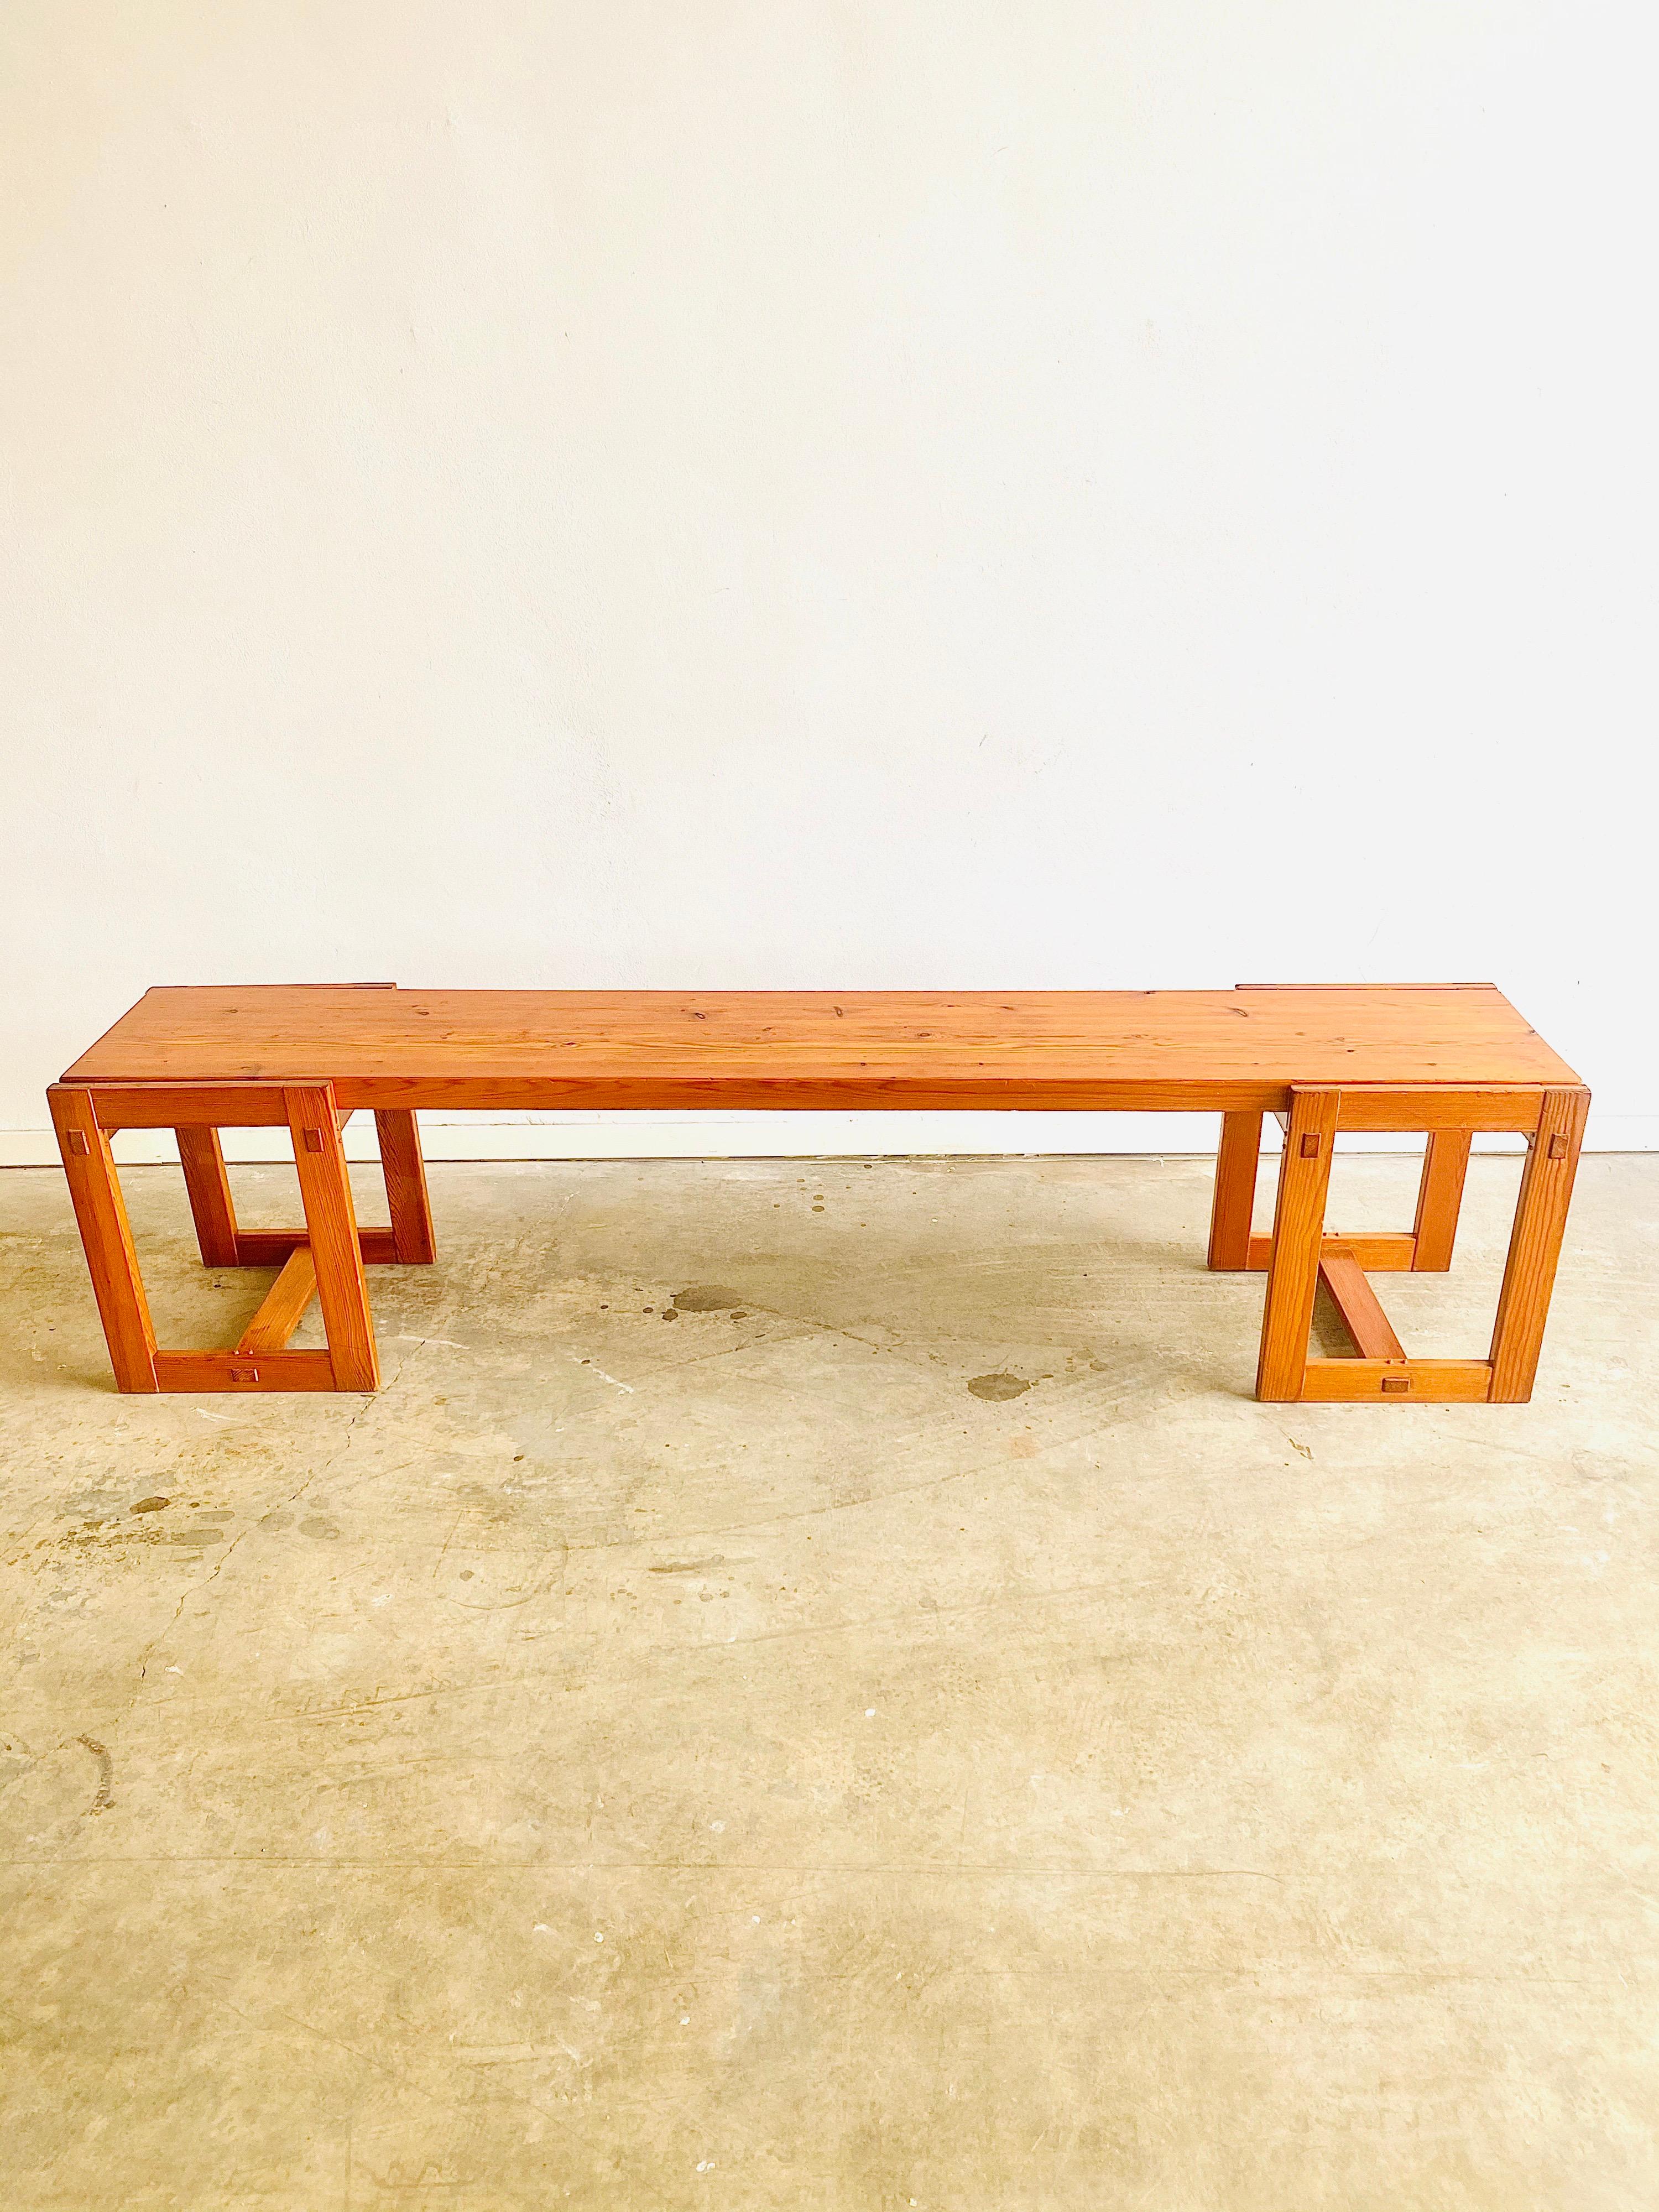 Rare Scandinavian Design low bench as part of the Trybo - series, designed in 1964 by Edvin Helseth to furnish
one of the multiple sleeping cabins in the Norwegian Trysil ski resort. Characteristics of the Trysil furniture are the use of pine, the